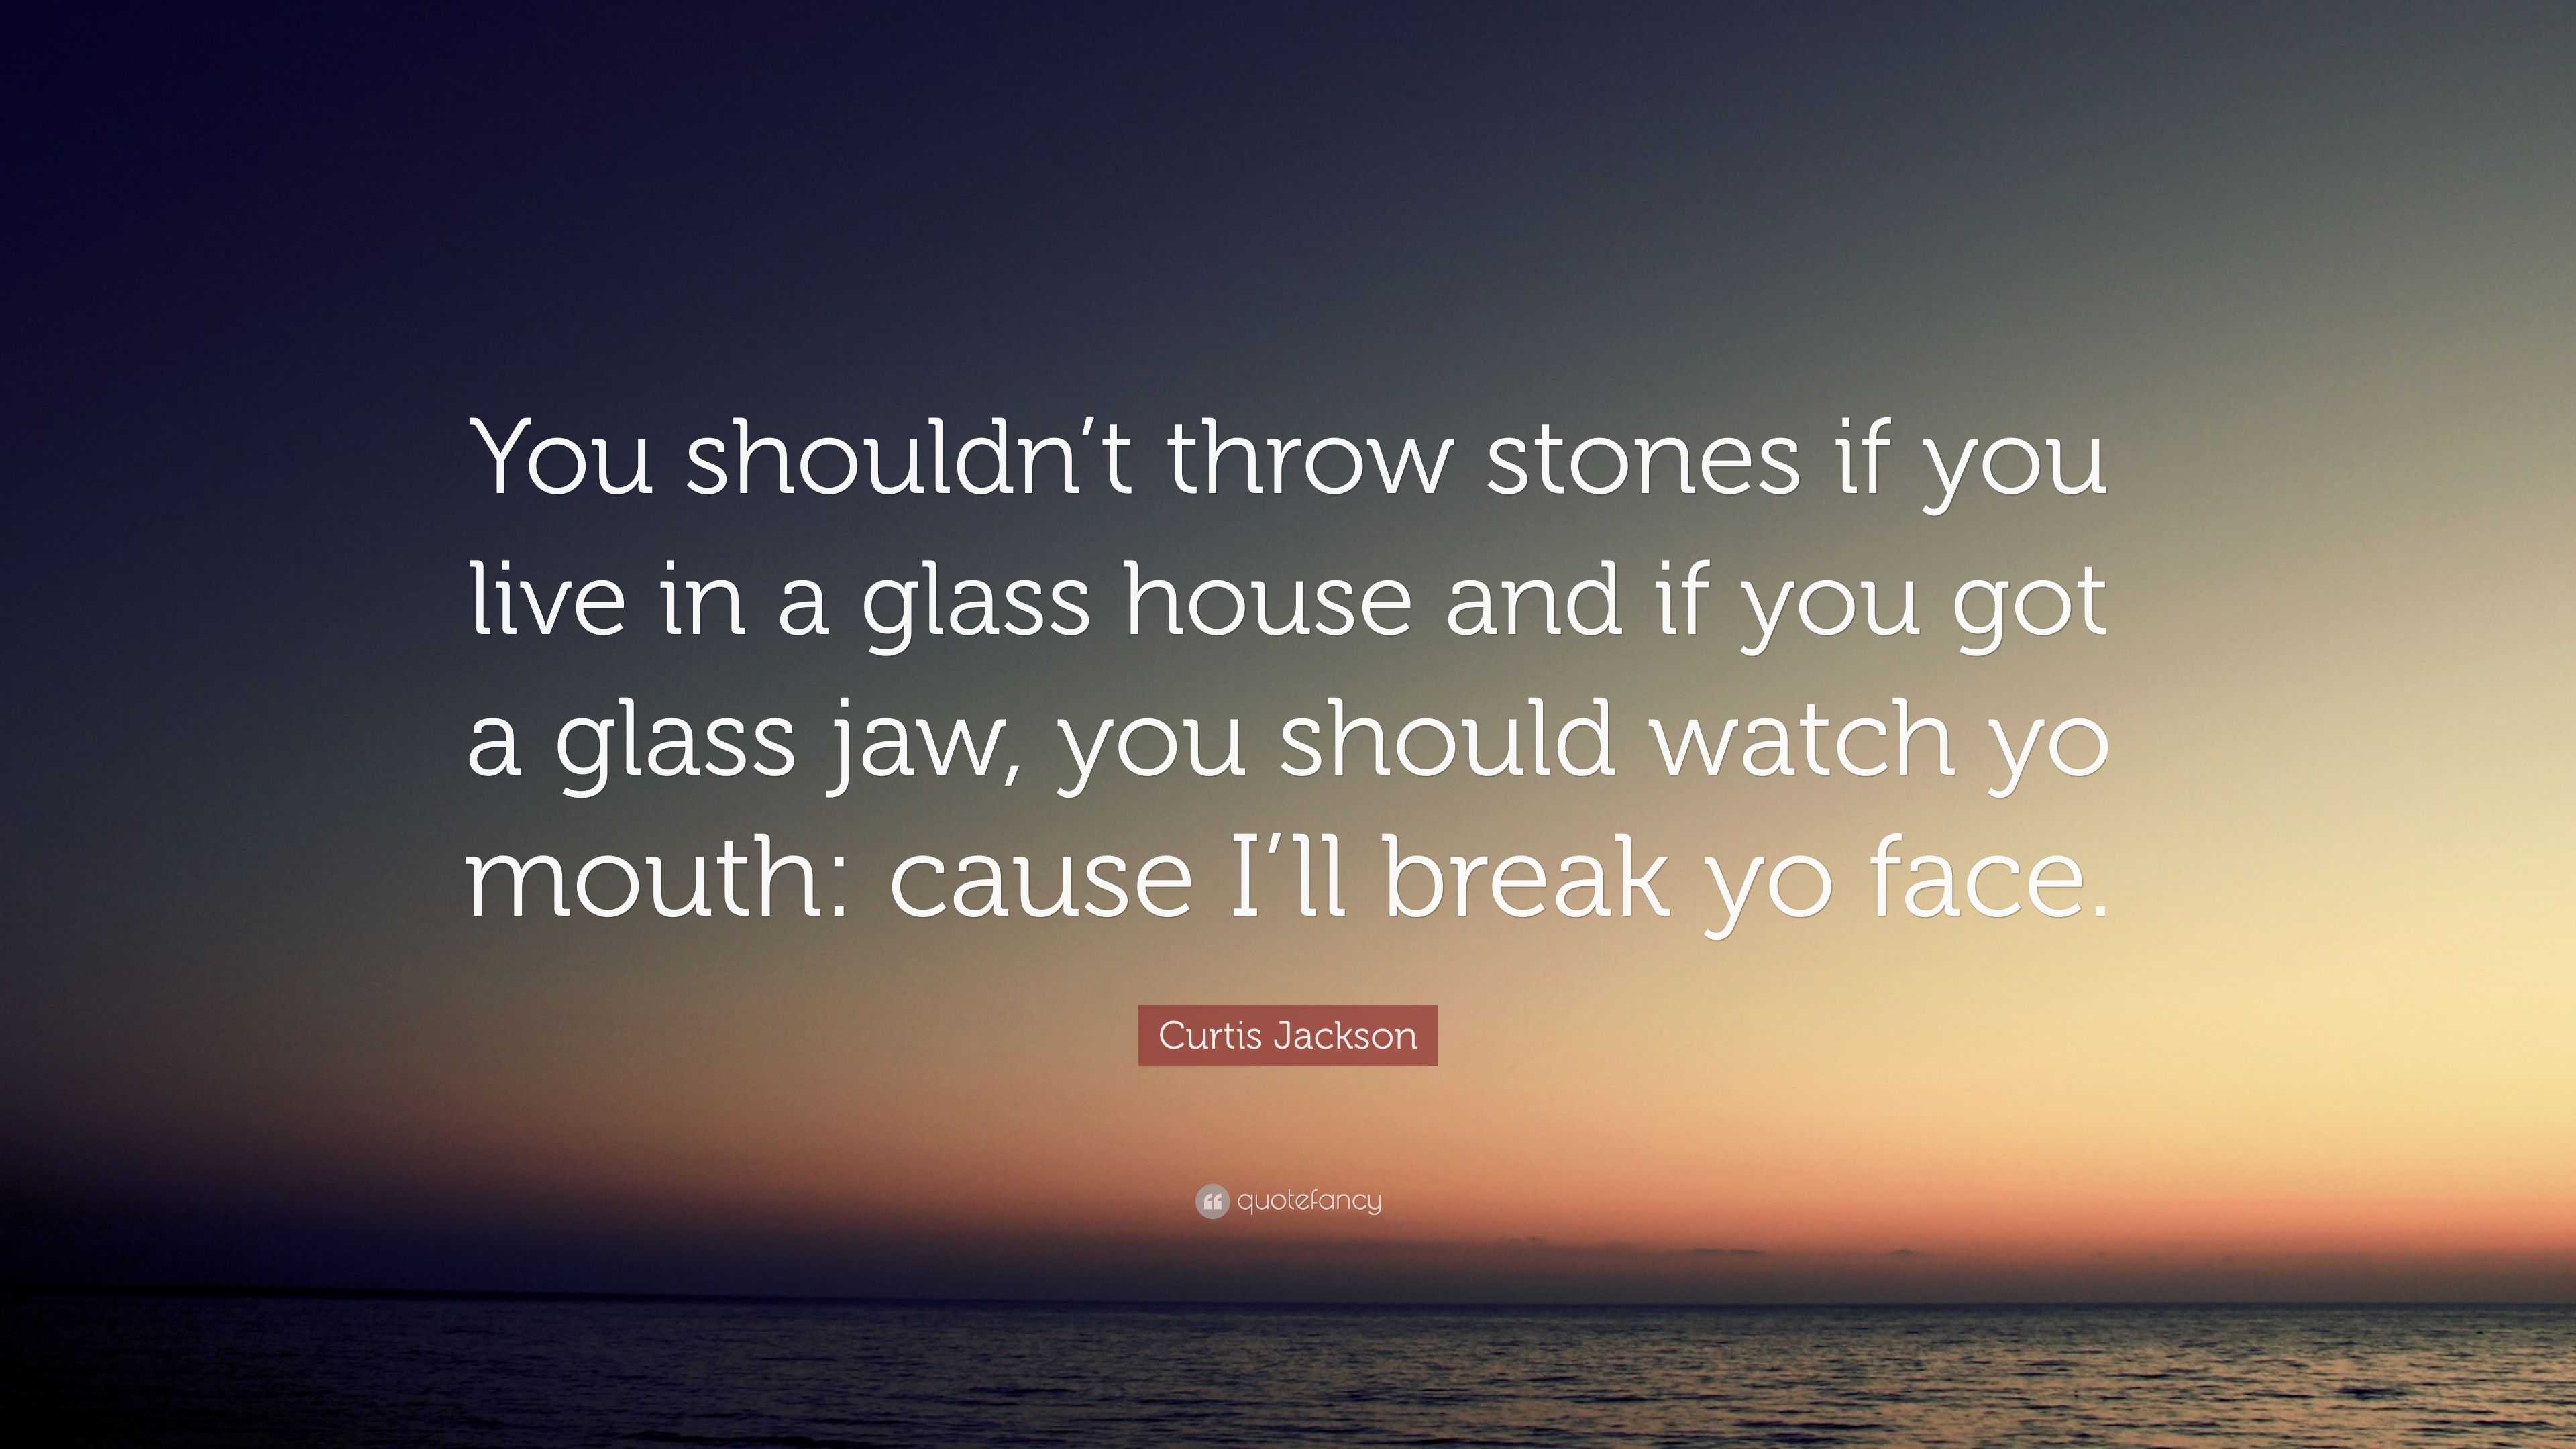 Curtis Jackson Quote “you Shouldn’t Throw Stones If You Live In A Glass House And If You Got A